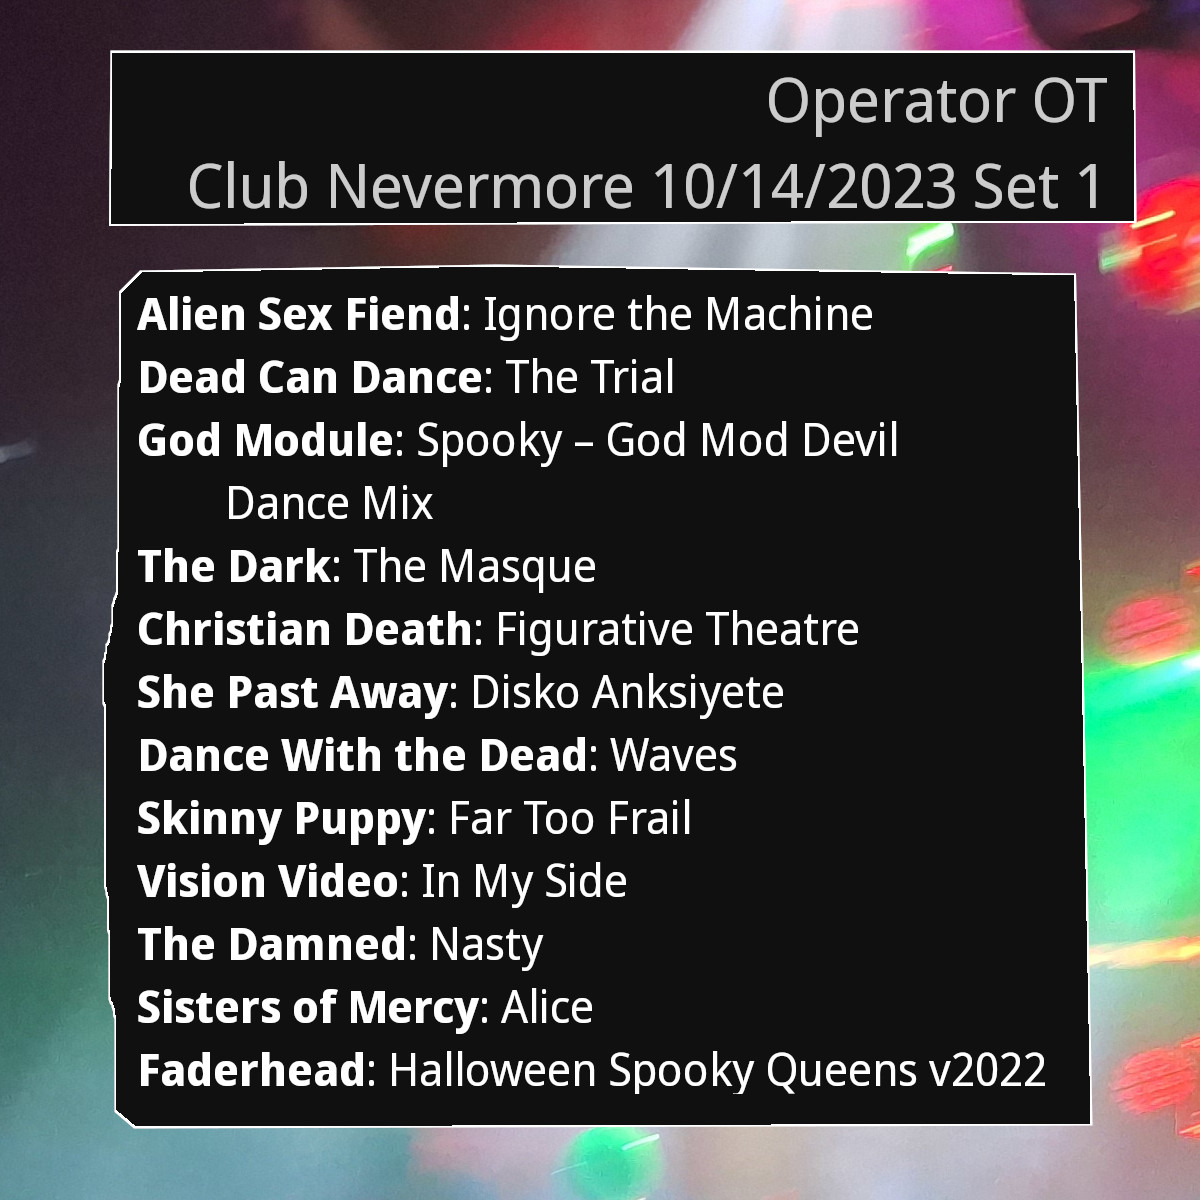 A picture of Operator OT&rsquo;s first set list from Club Nevermore on October 14, 2023. The text of the list is below this image.